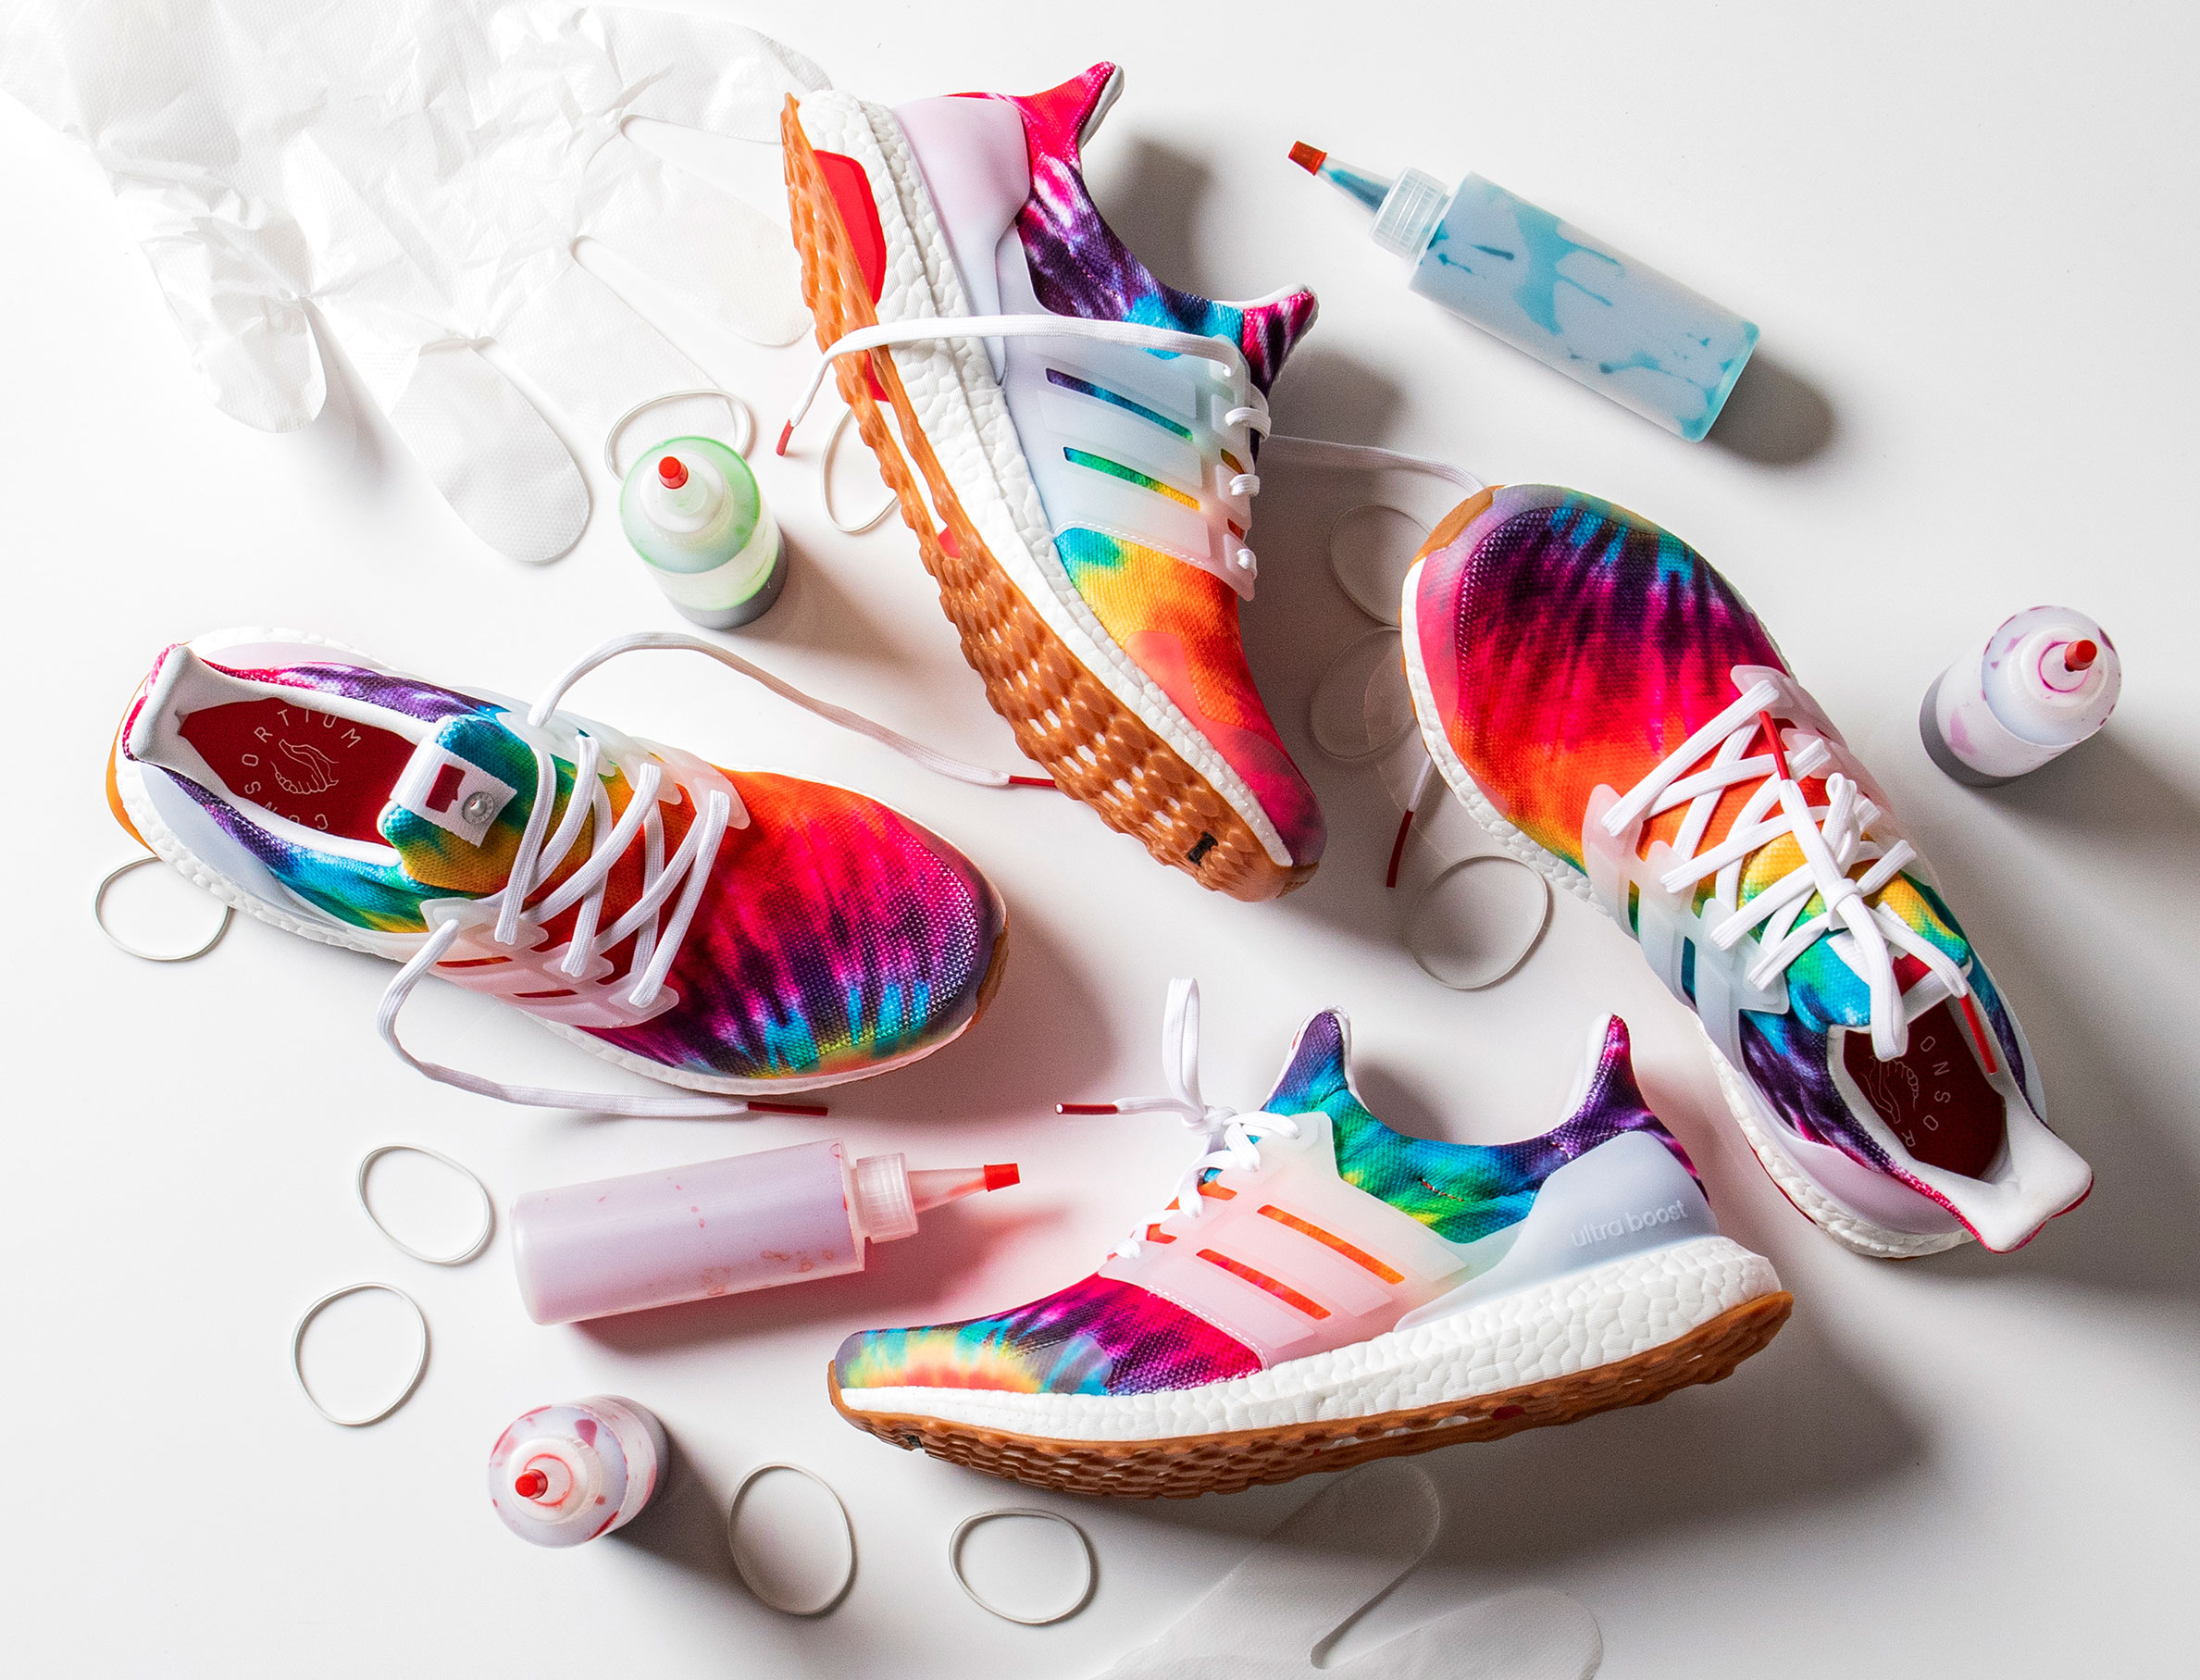 adidas tie dye shoes for sale